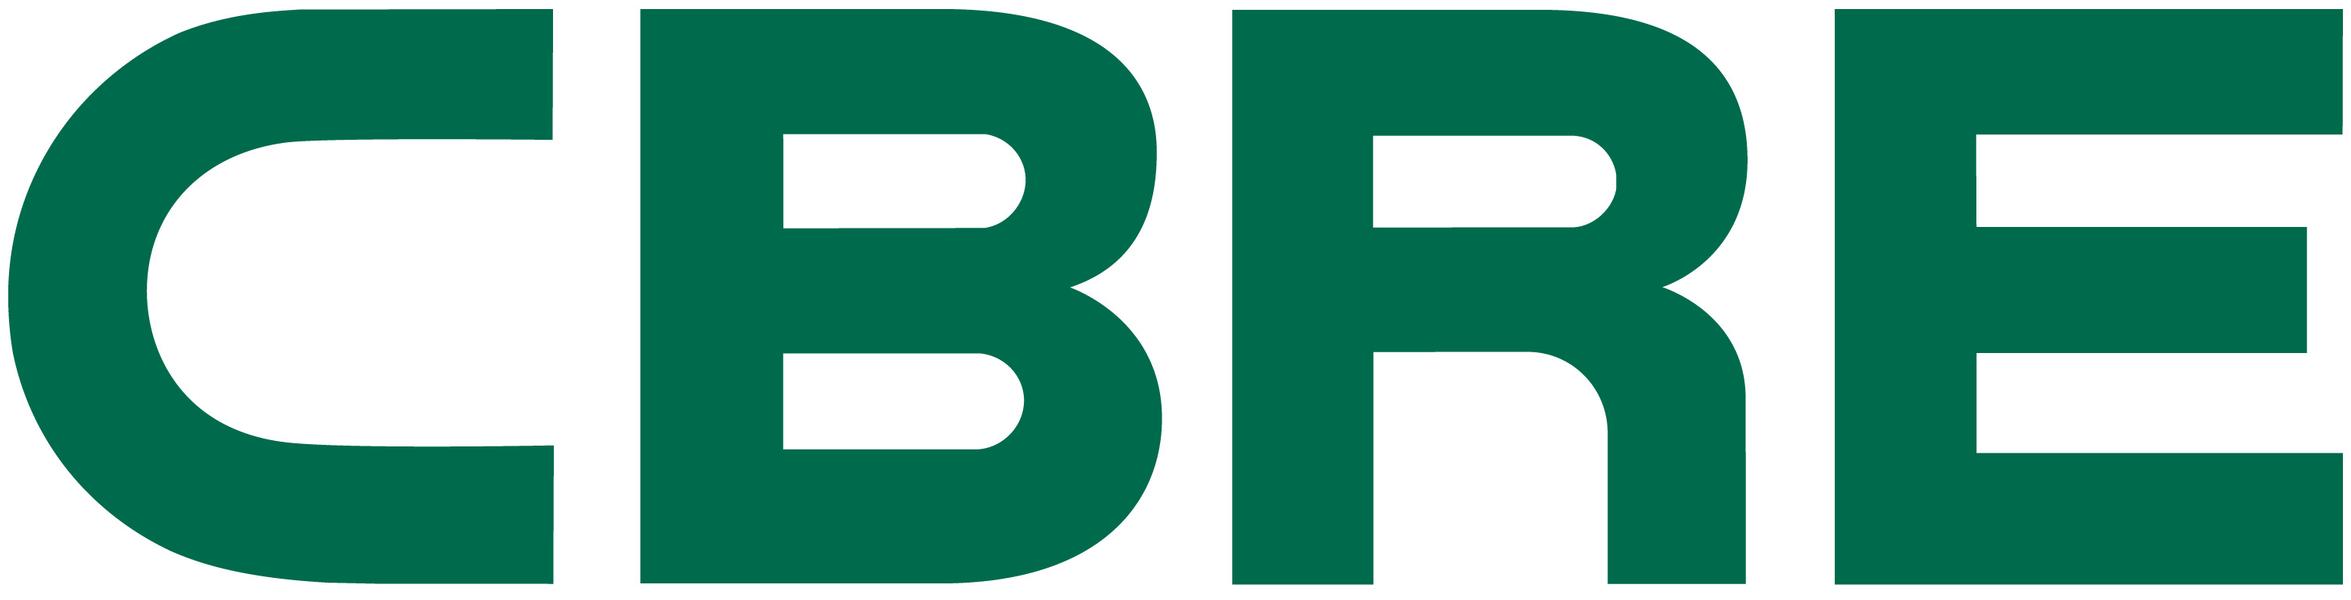 cbre logo recognized references innovation responsibility corporate customer social group among inc company outsourcers iaop